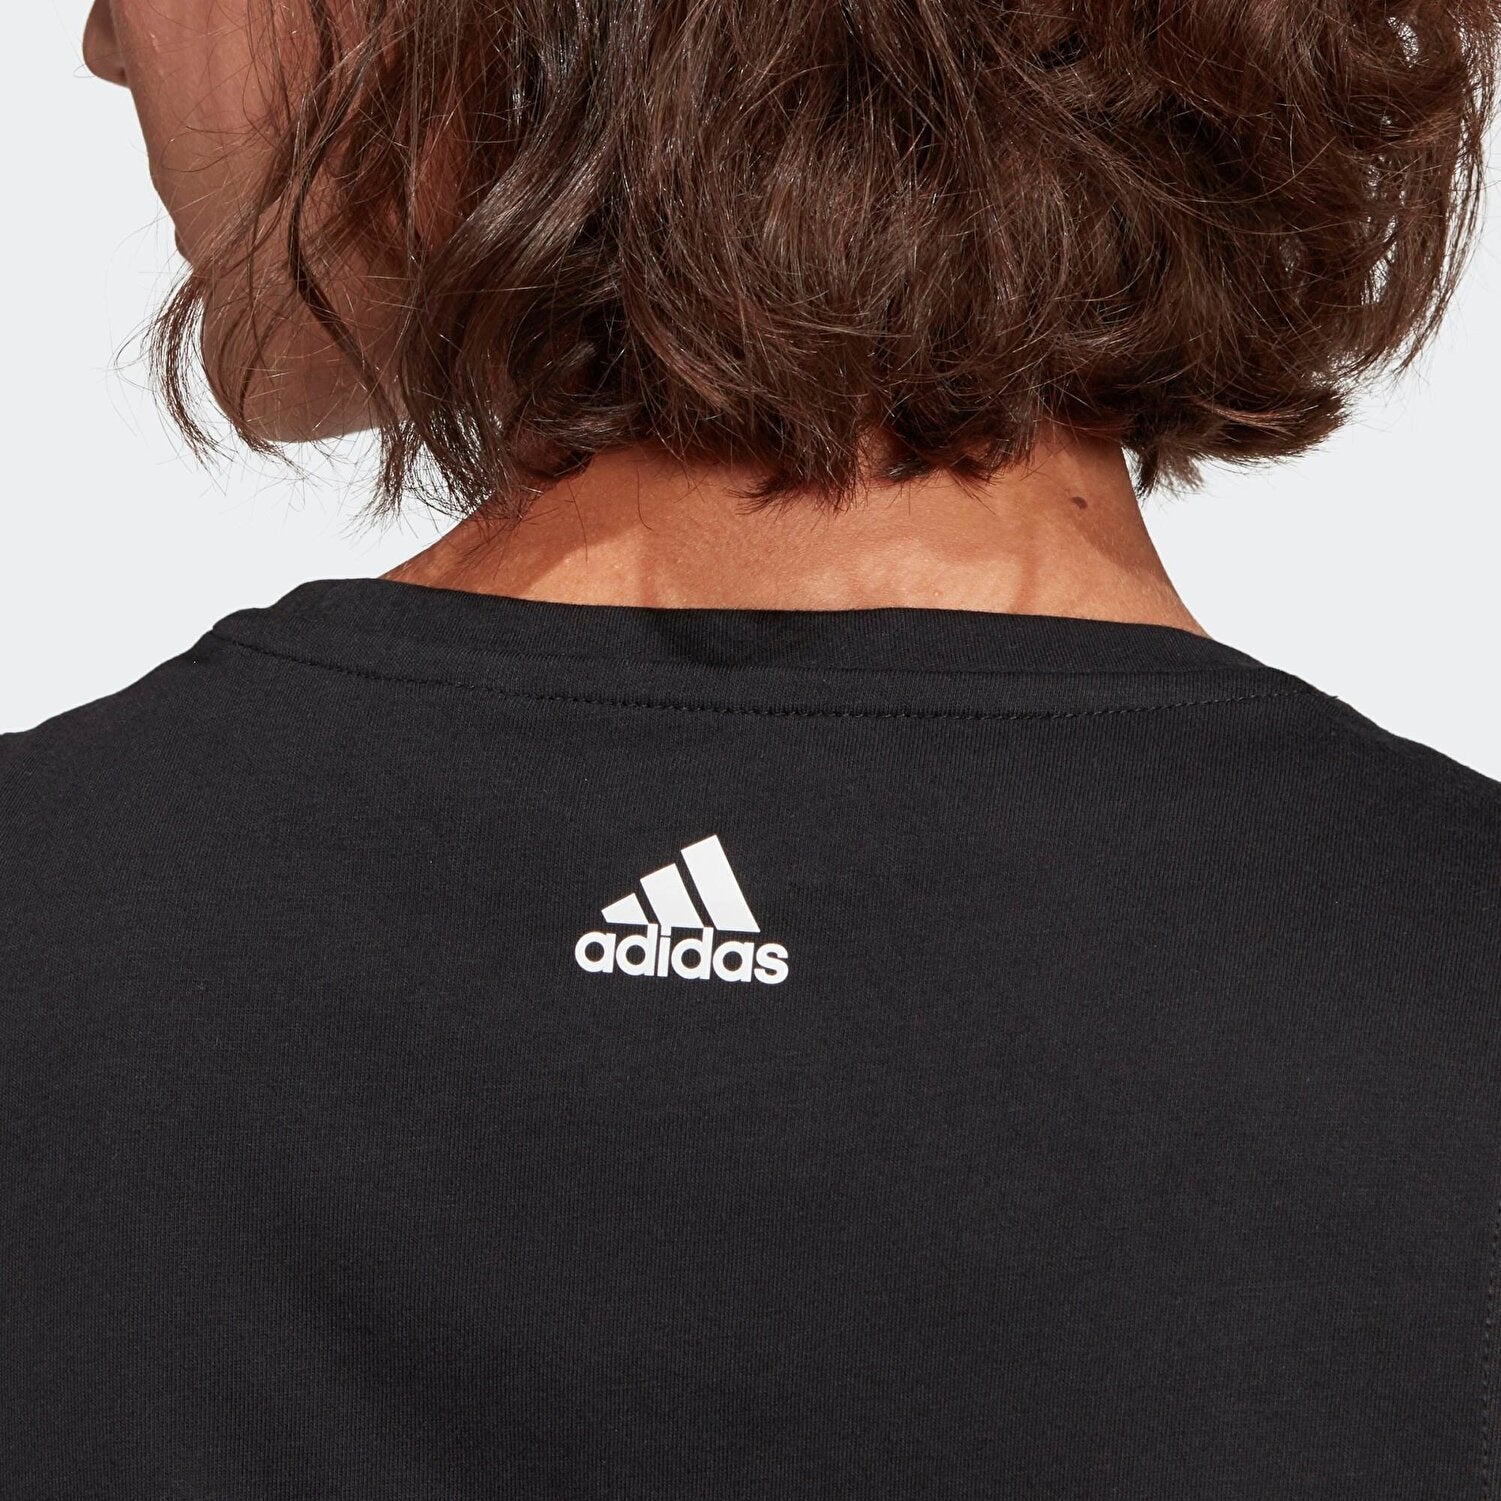 ADIDAS ESSENTIALS STACKED LOGO TANK TOP